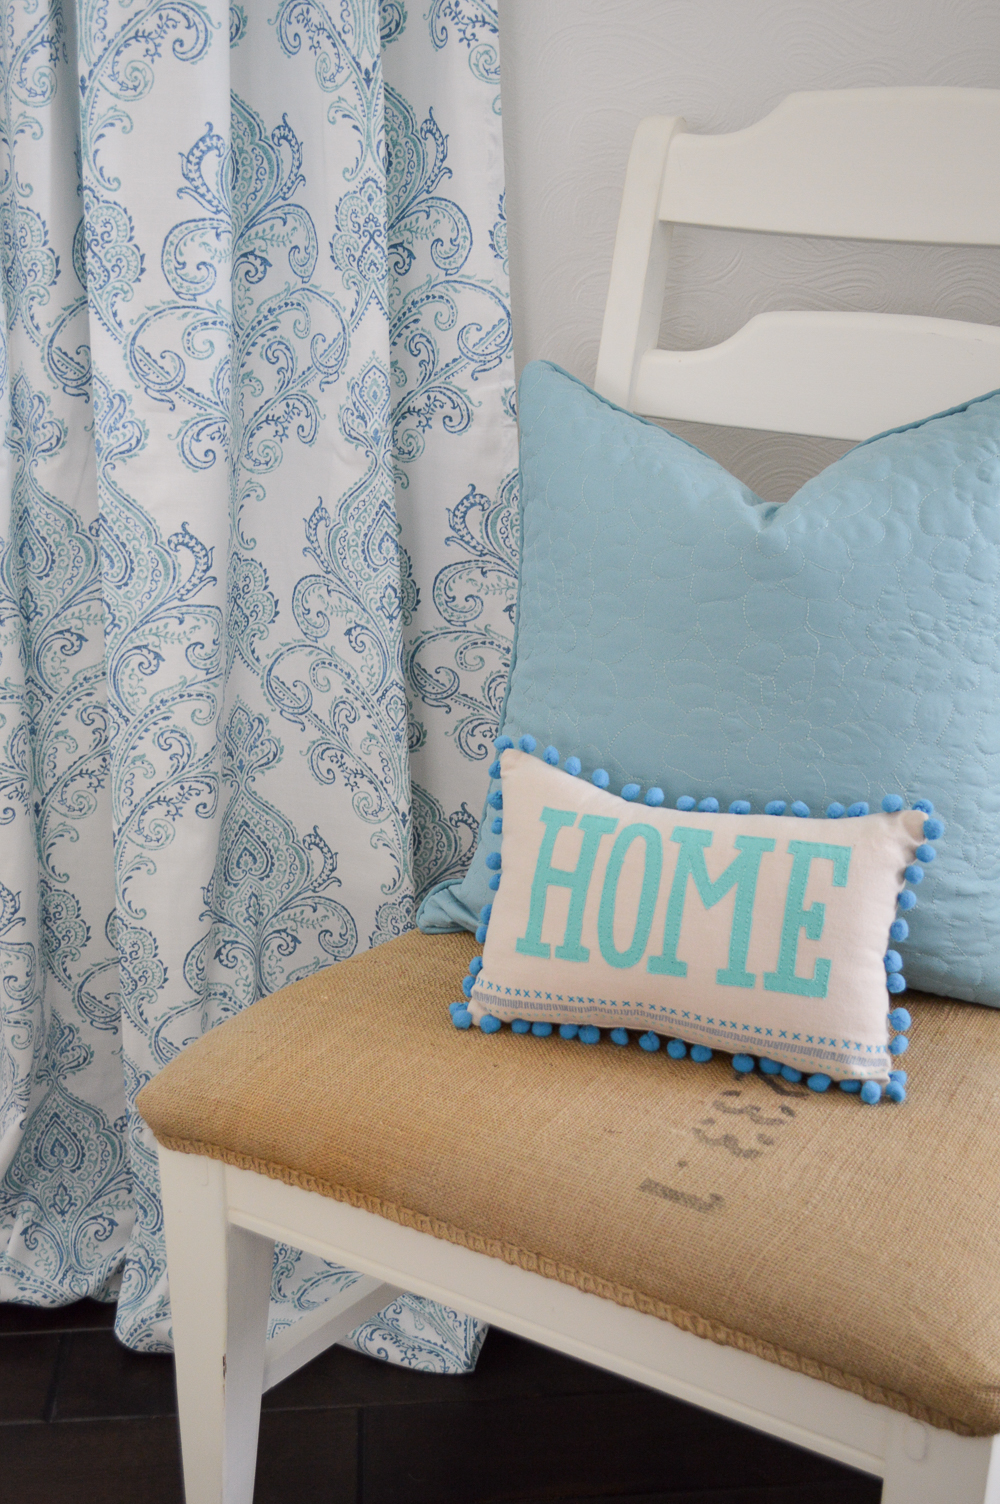 I'm bringing aqua back to my cottage home, for an airy coastal feel. Aqua Blue Cottage Home Decorating Ideas at Fox Hollow Cottage blog - www.foxhollowcottage.com